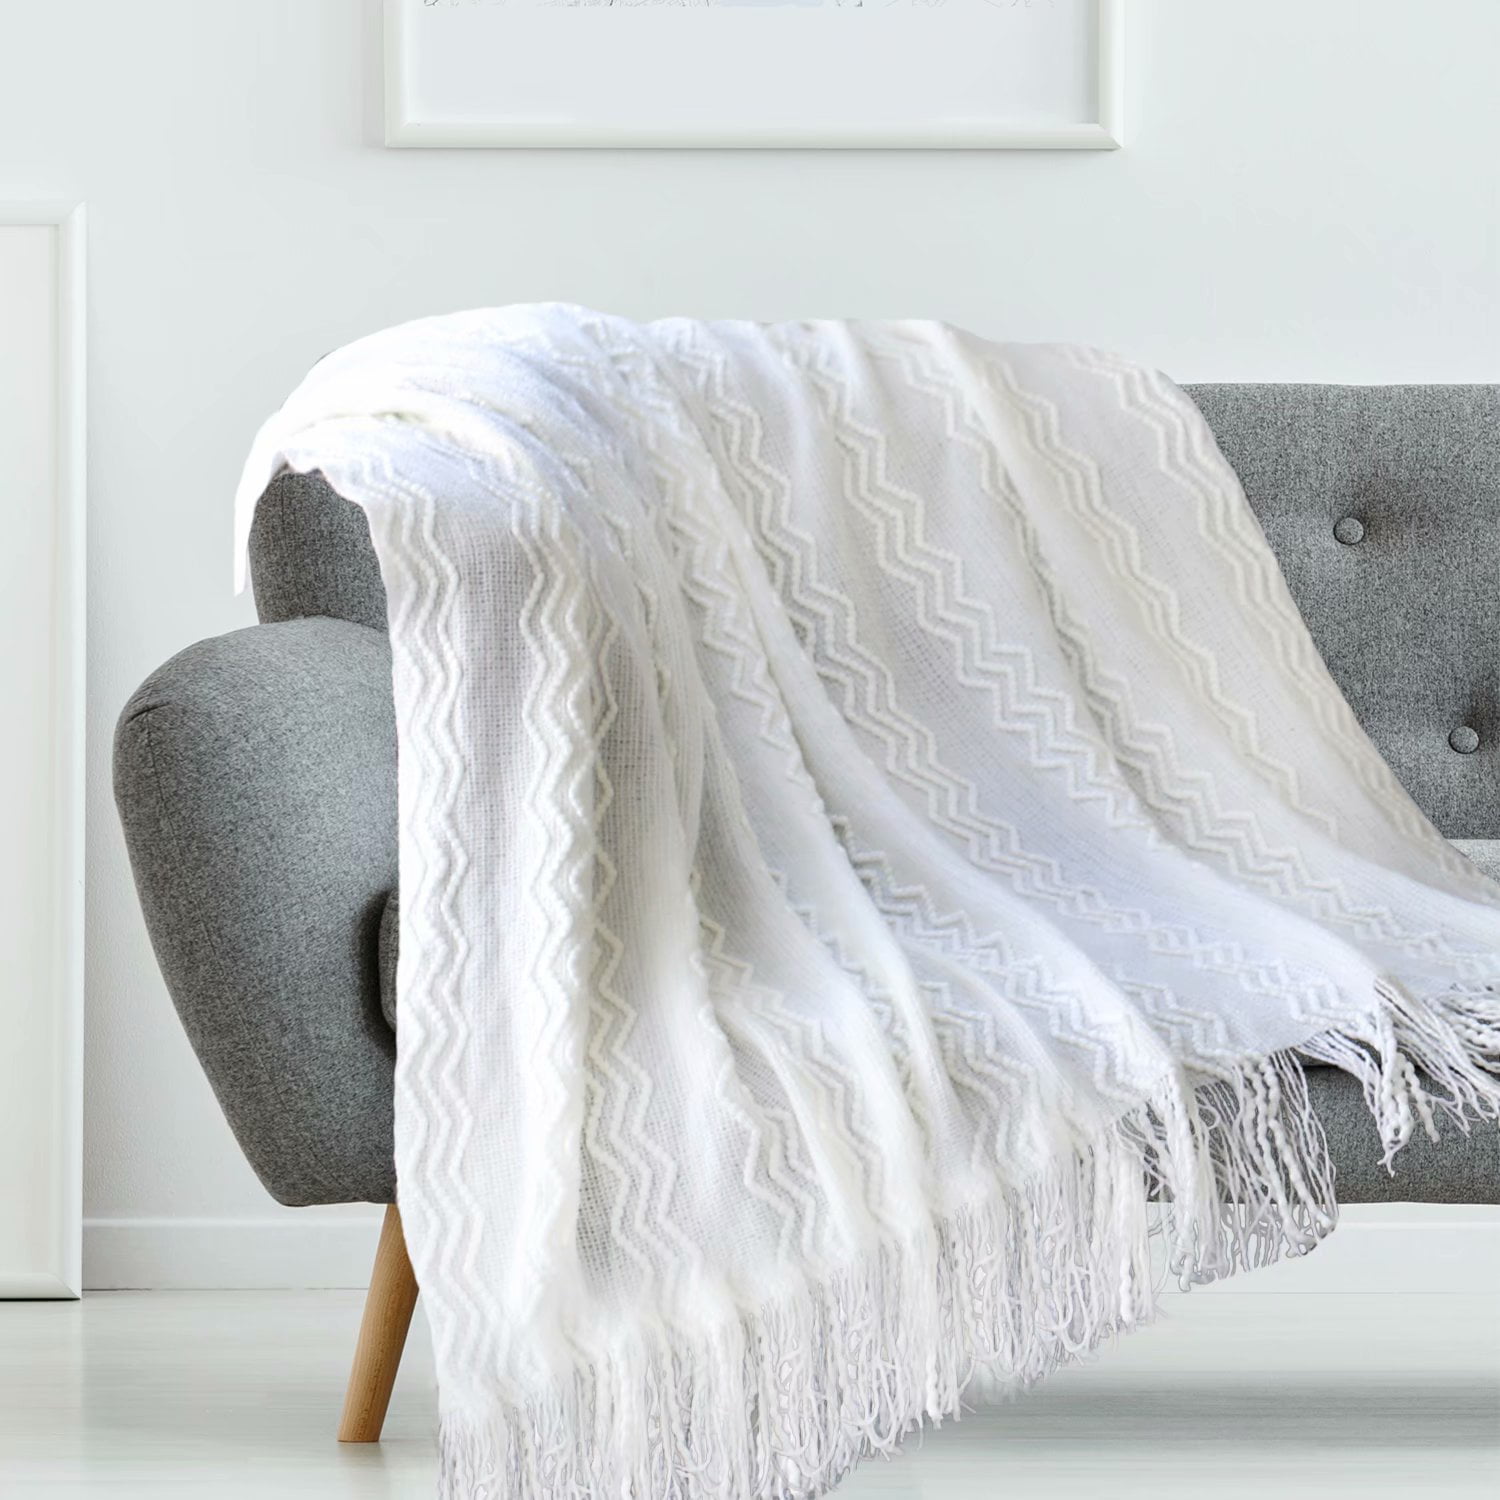 Machine Washable Eyein Knitted Throw Blanket for Sofa Soft Cozy Lightweight Blankets Fluffy Acrylic Warm Wool with Decorative Tassels for Single Beds Couch Office Shawl Lunch Break Armchairs Home 